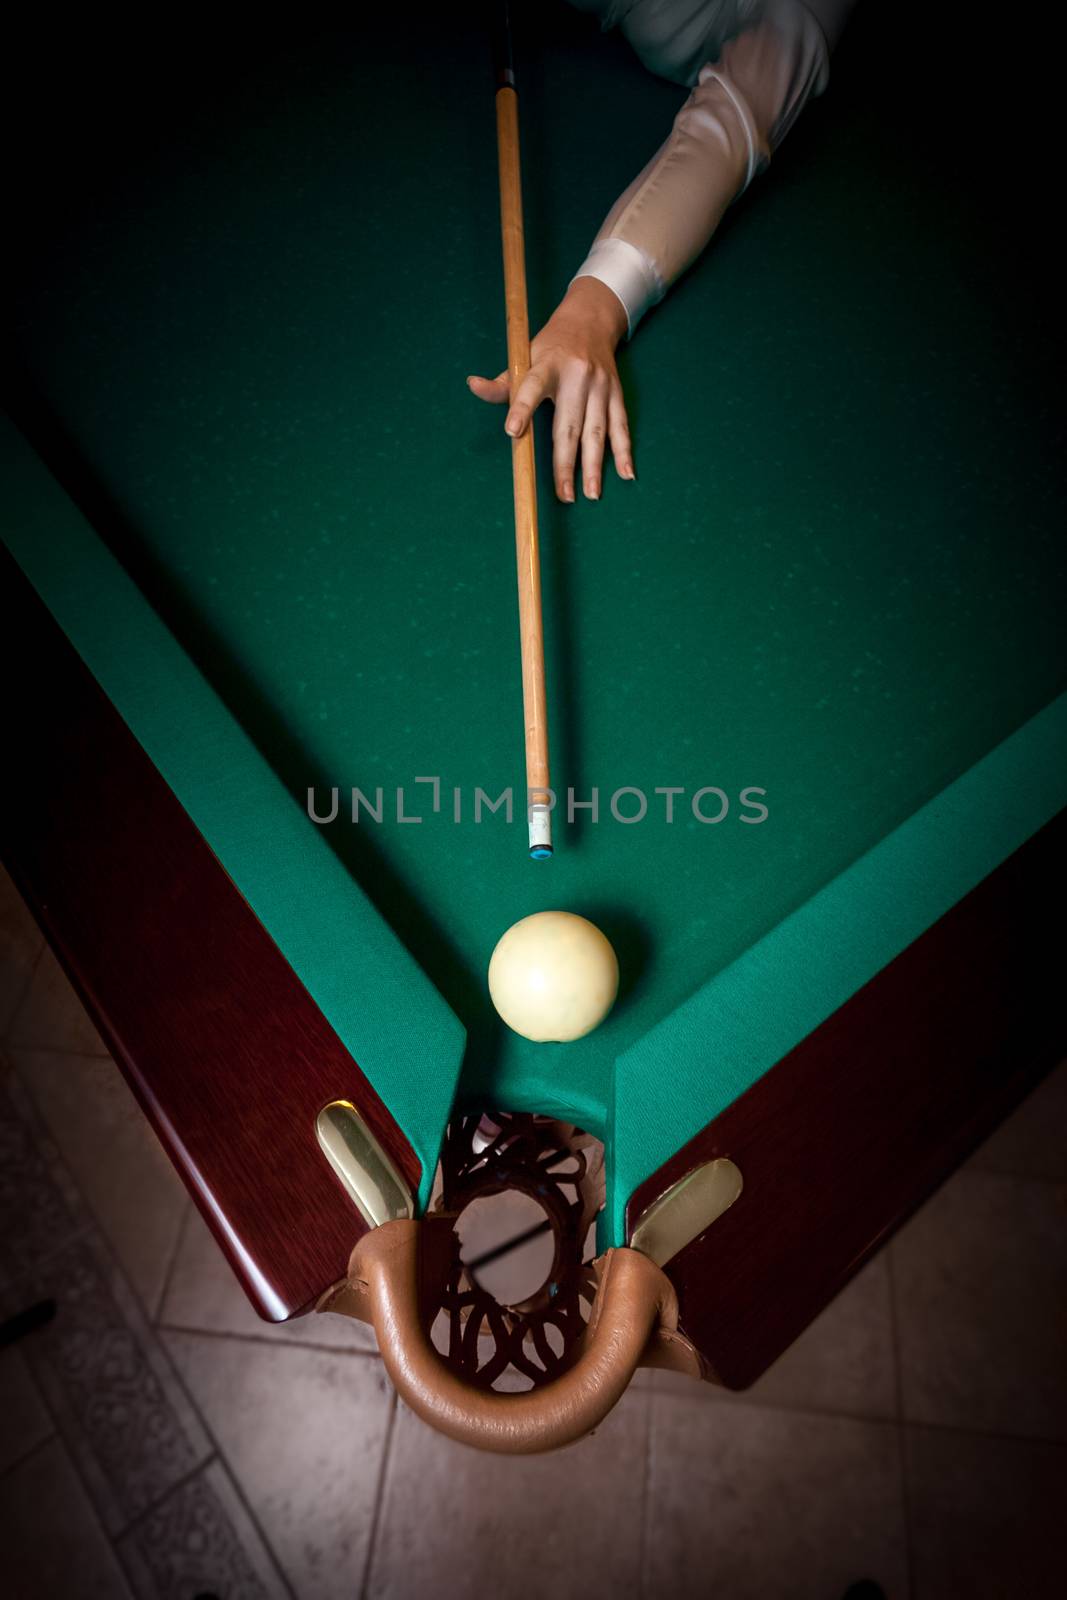 Woman aiming at billiard pocket with white ball